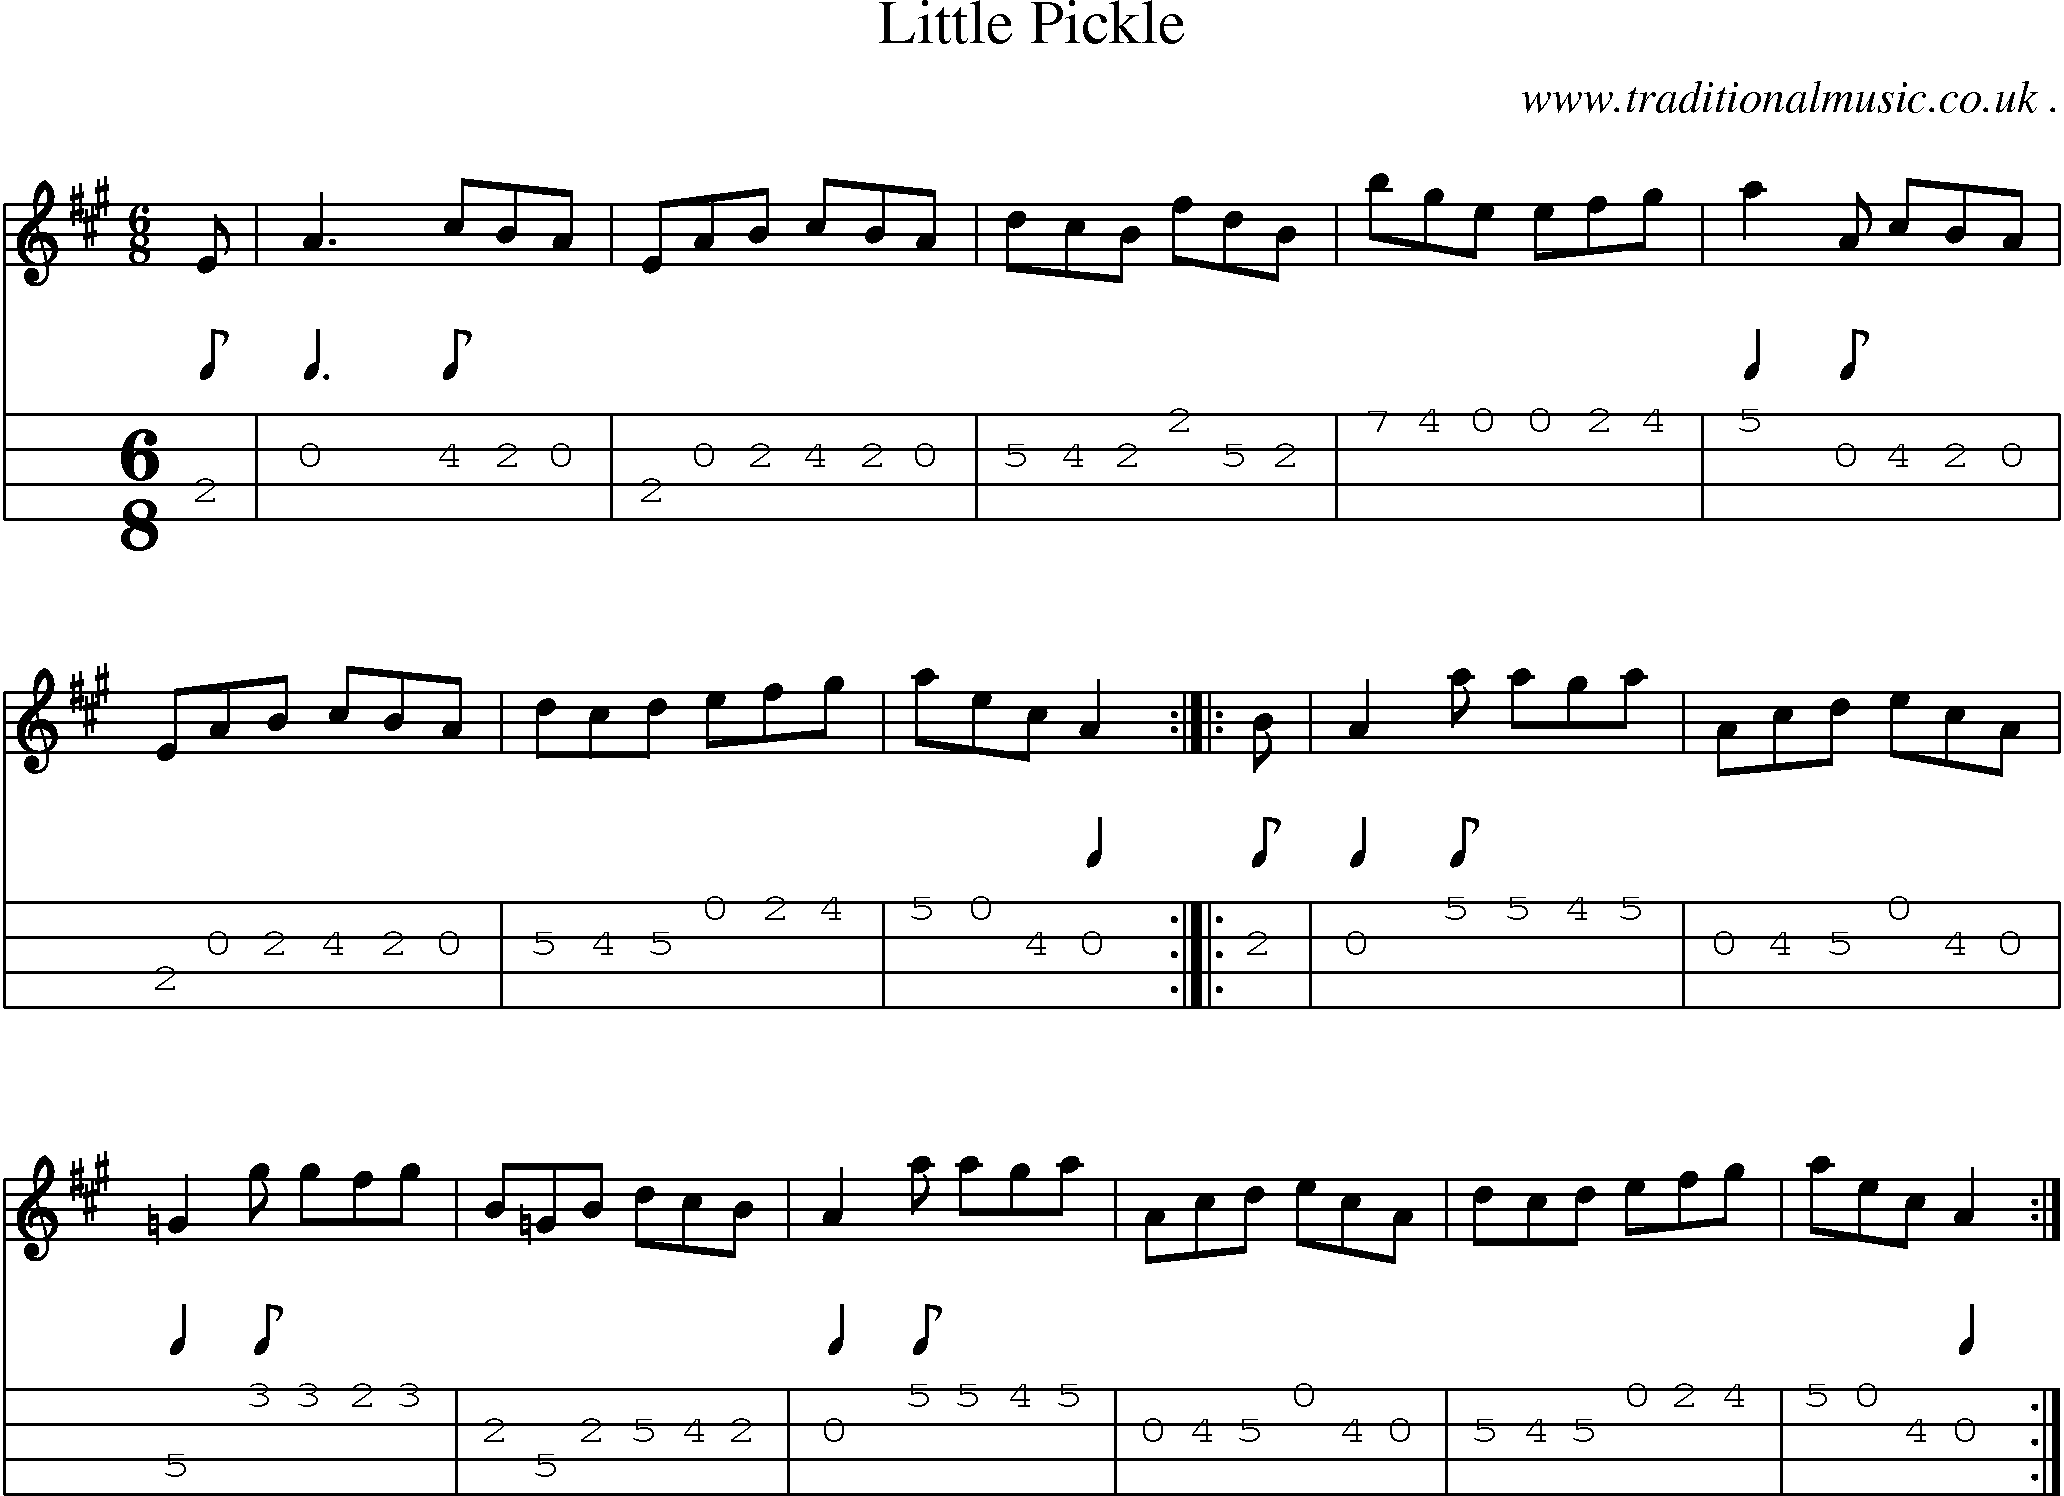 Sheet-music  score, Chords and Mandolin Tabs for Little Pickle